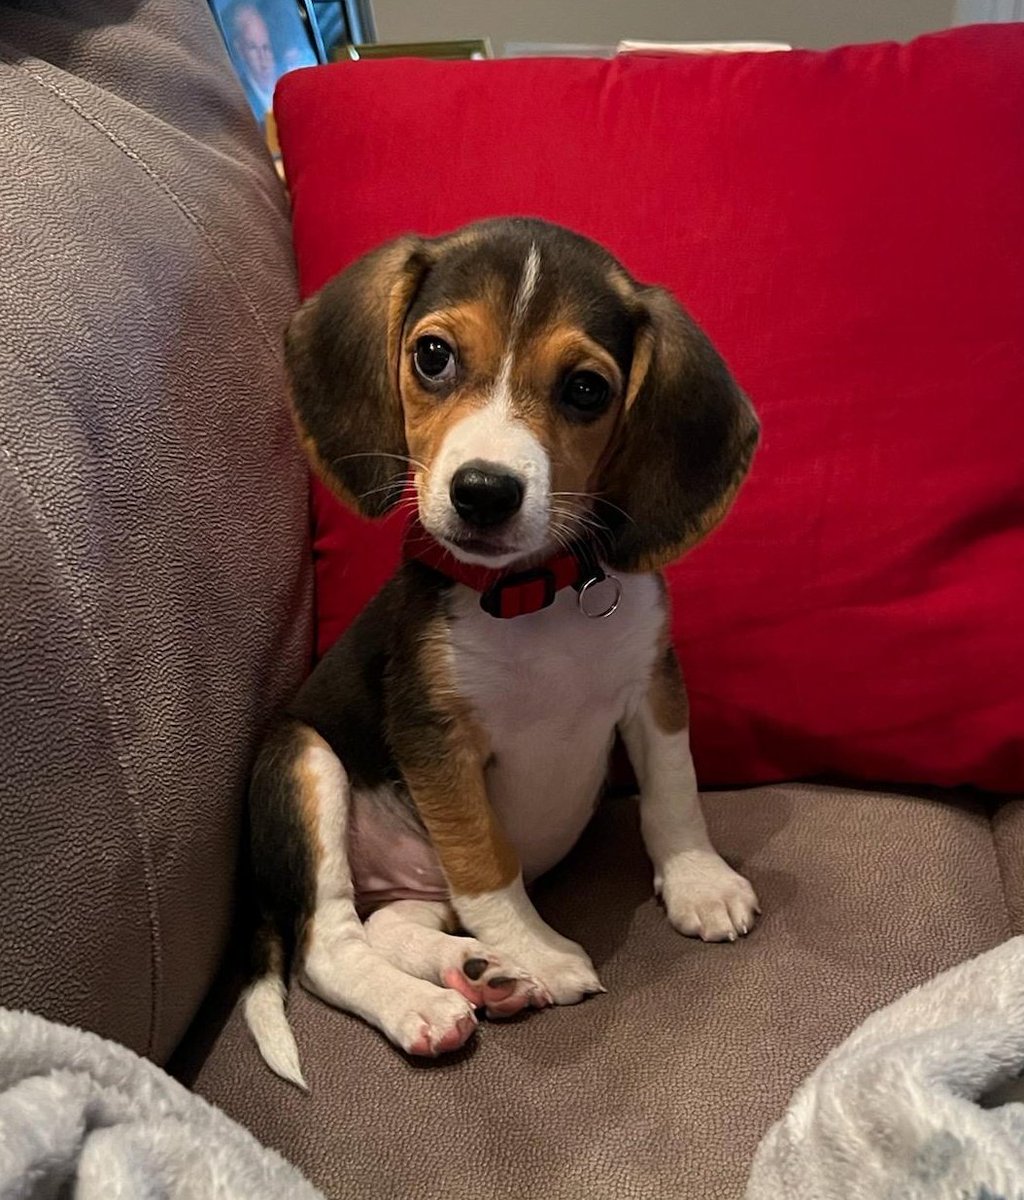 Happy 'GOTYA' day for this little bundle of joy! Thanks to the @APAofMO for helping Rosie and all the thousands of pets you save find their forever homes! @FOX2now #stlwx #beagles